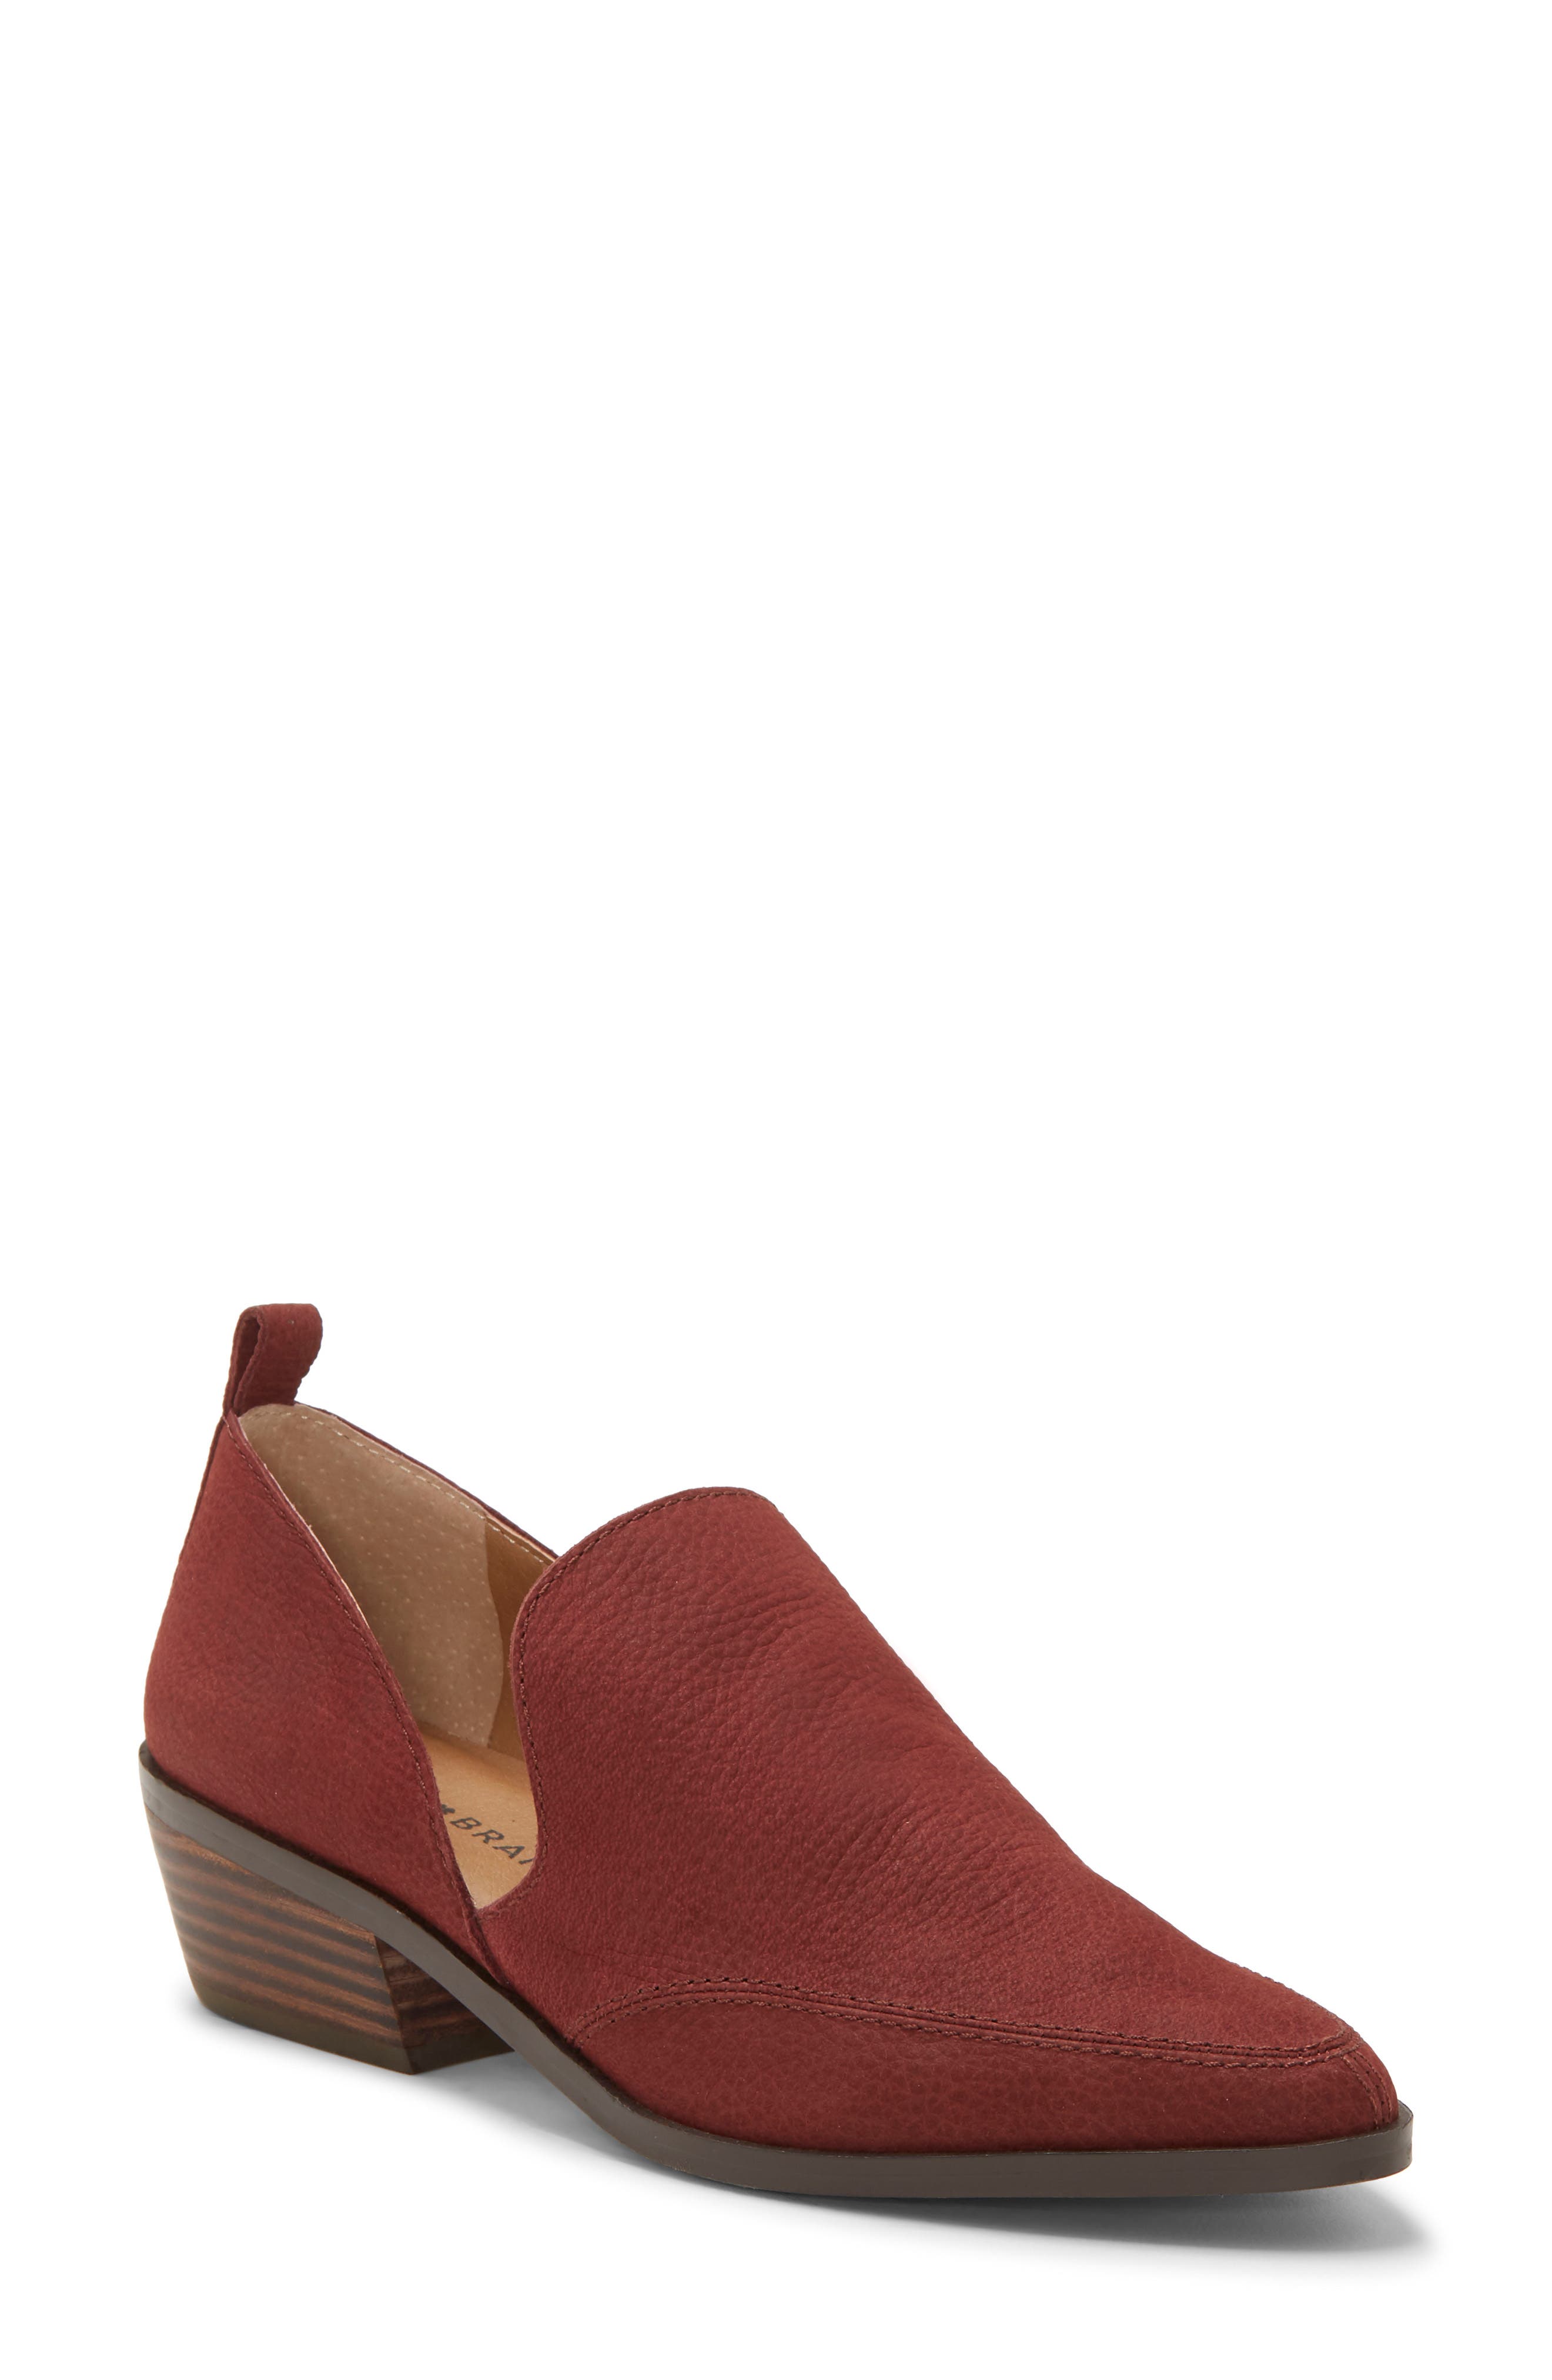 UPC 191644545696 product image for Women's Lucky Brand Mahzan Bootie, Size 9.5 M - Red | upcitemdb.com